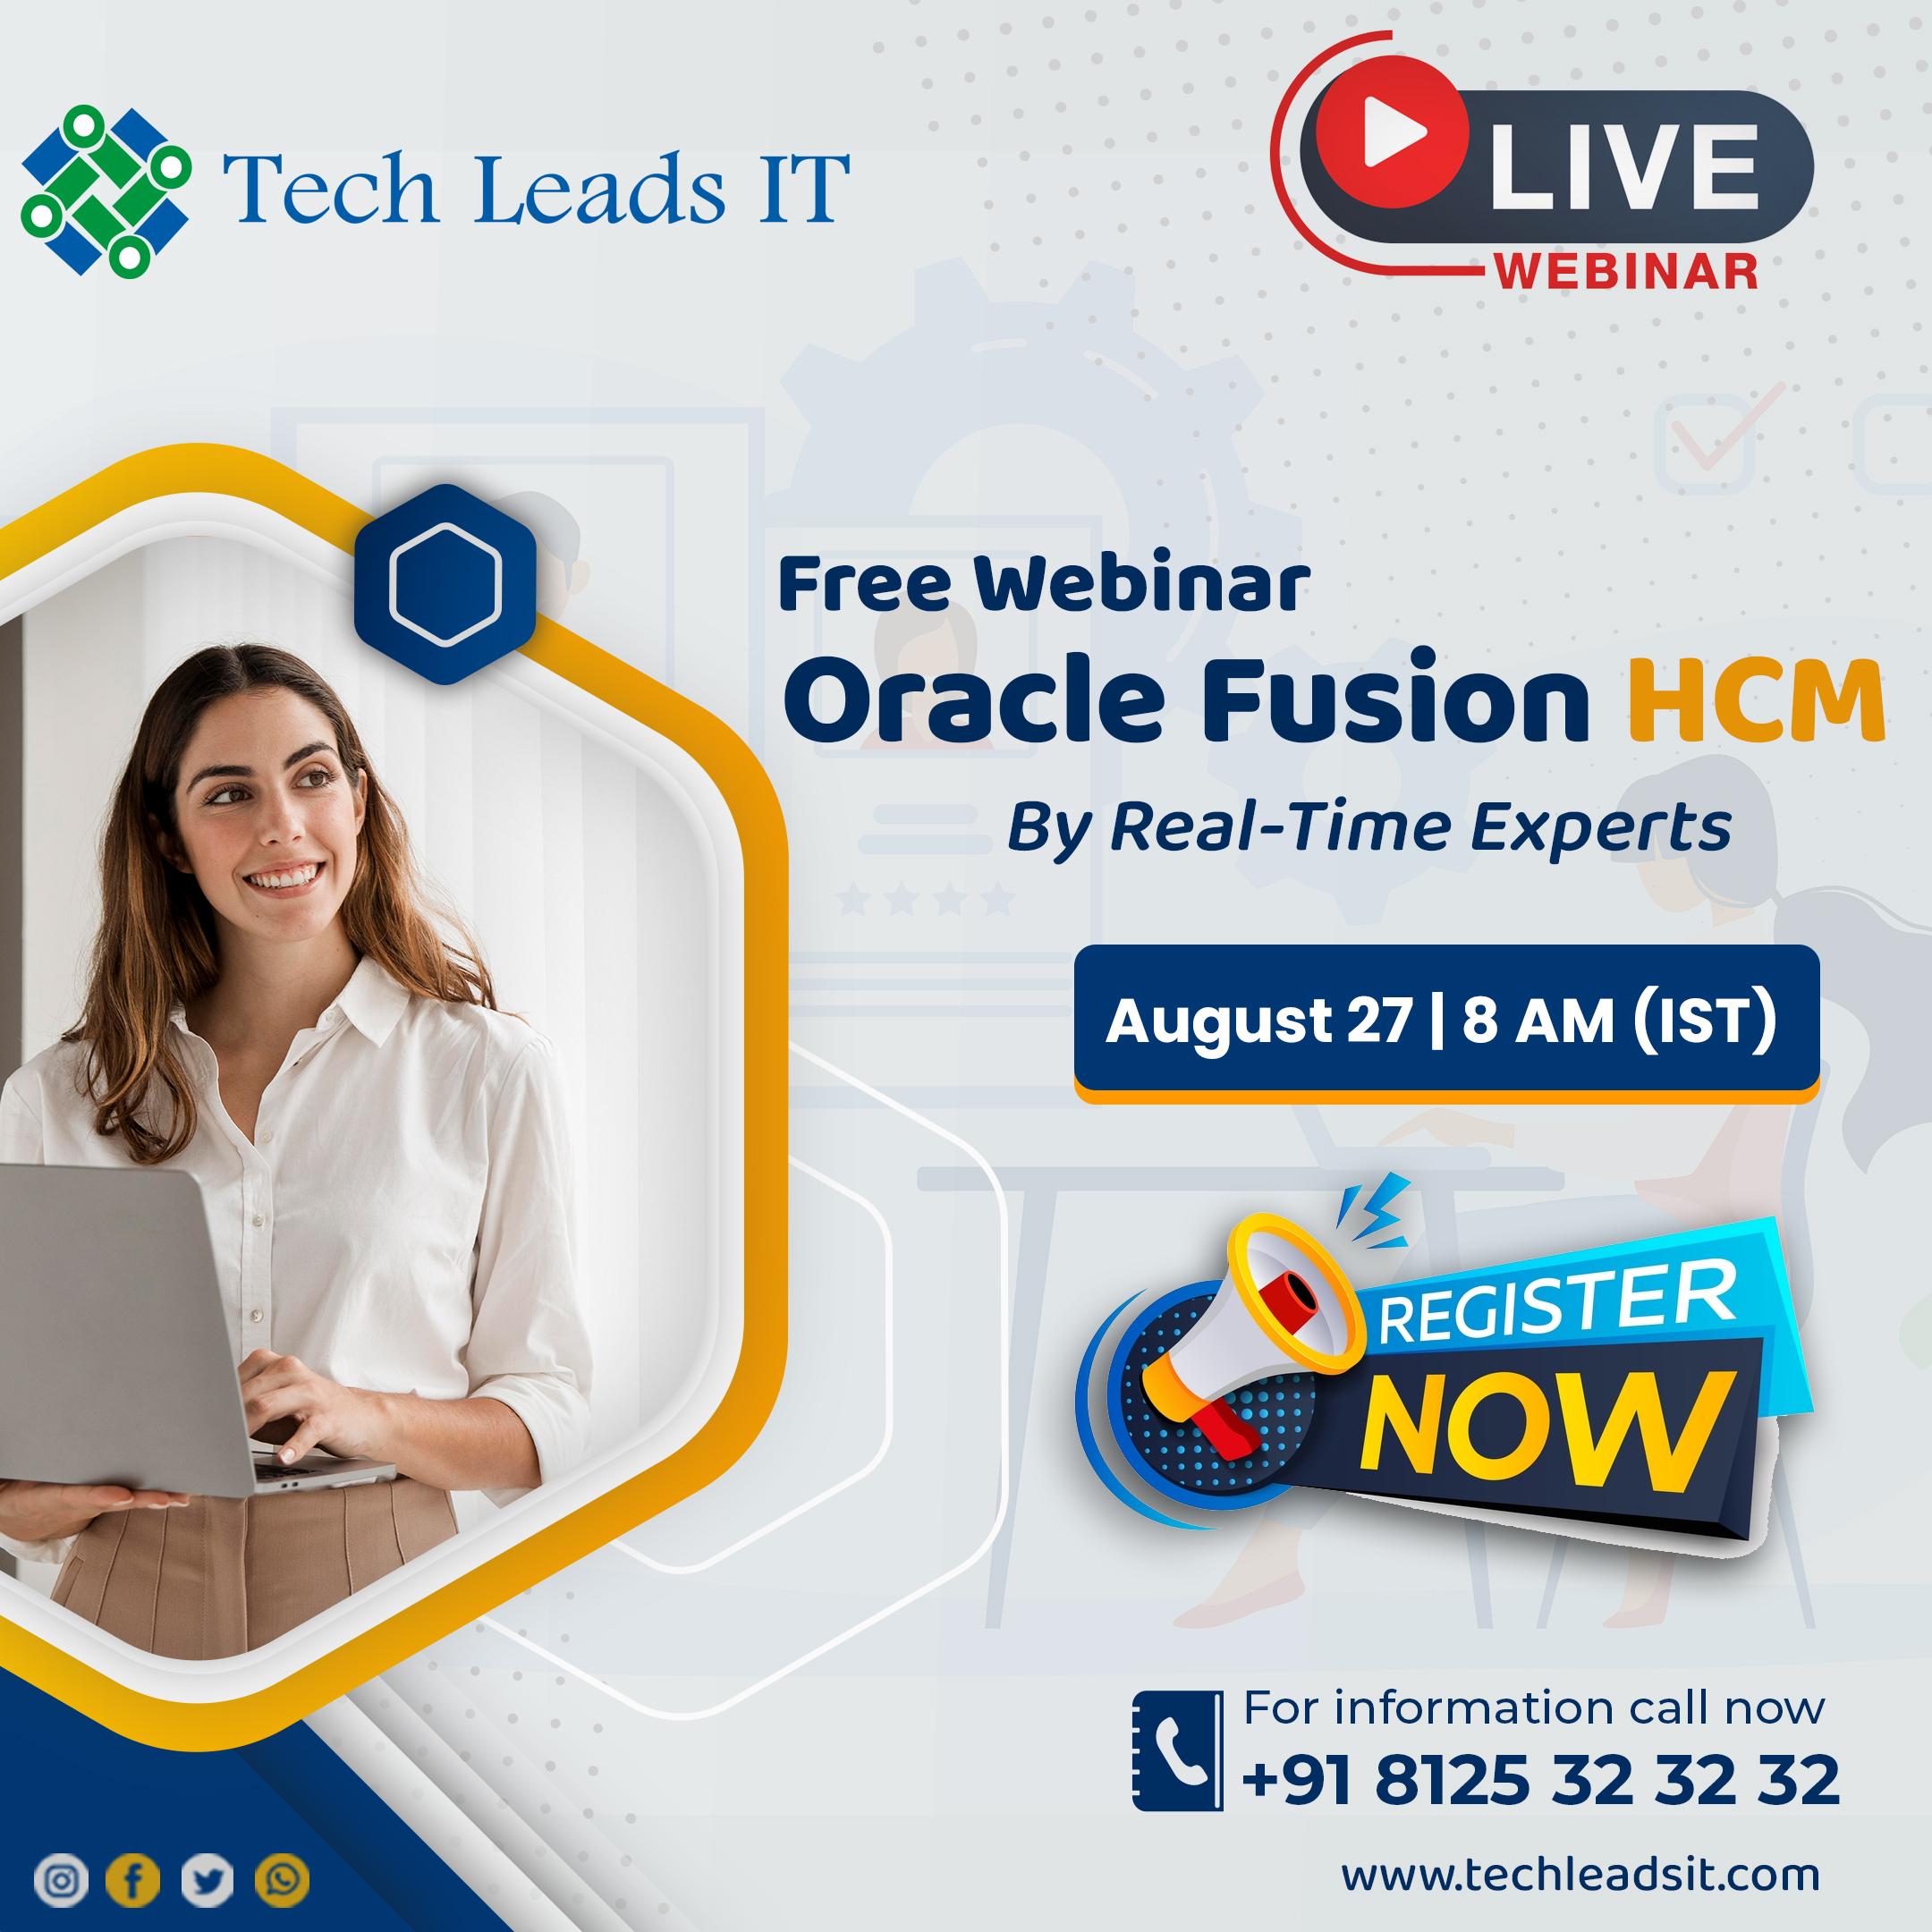 Oracle Fusion HCM Training Free Webinar, Online Event